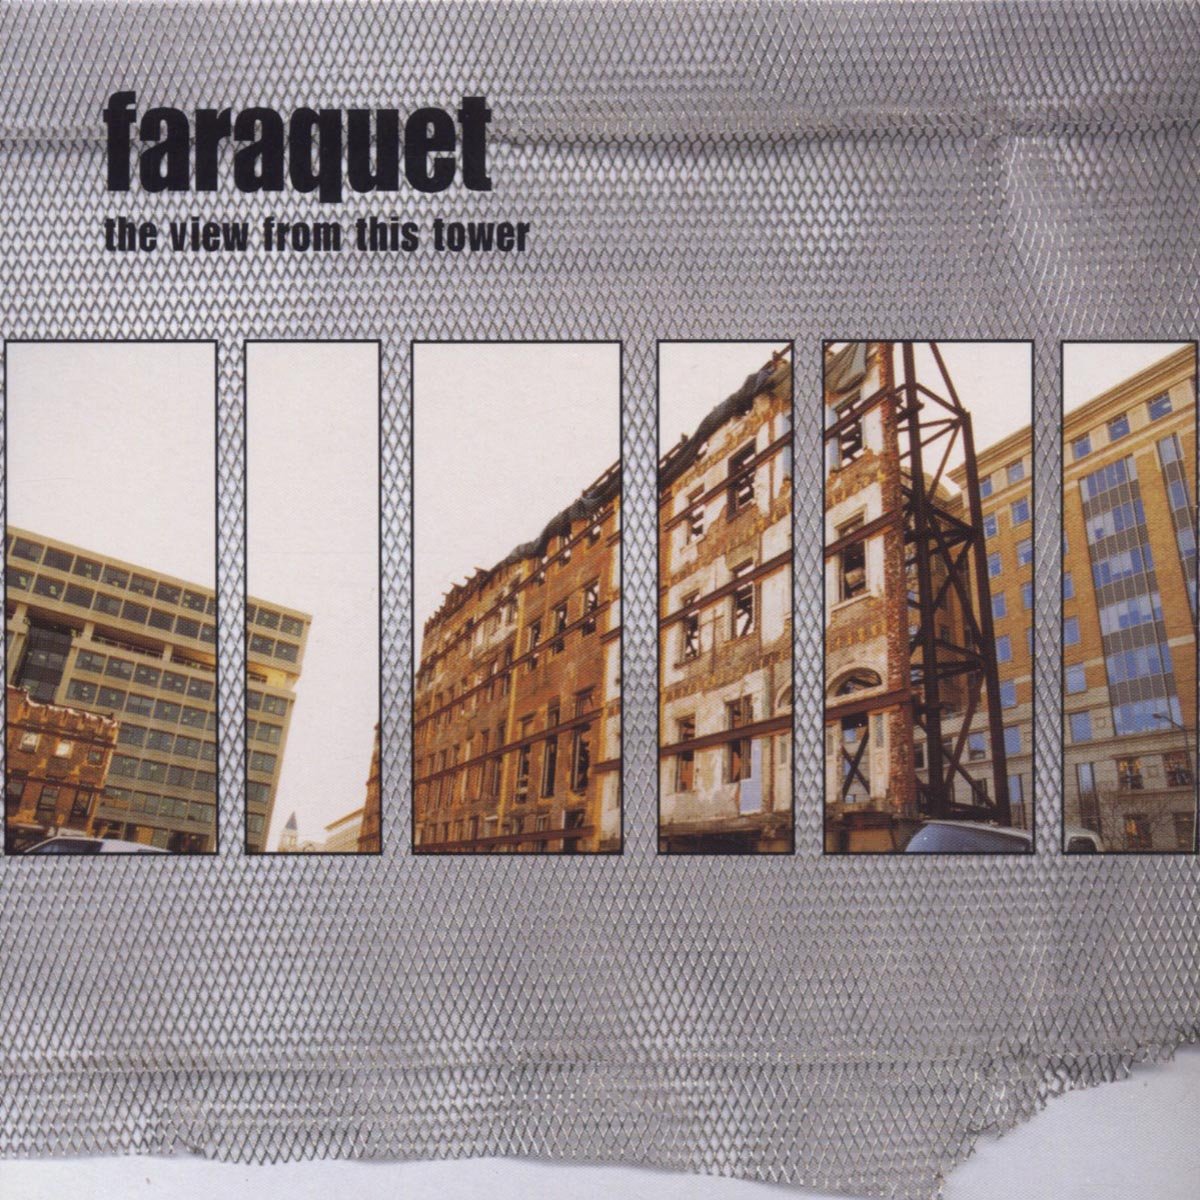 Faraquet/The View From This Tower [LP]